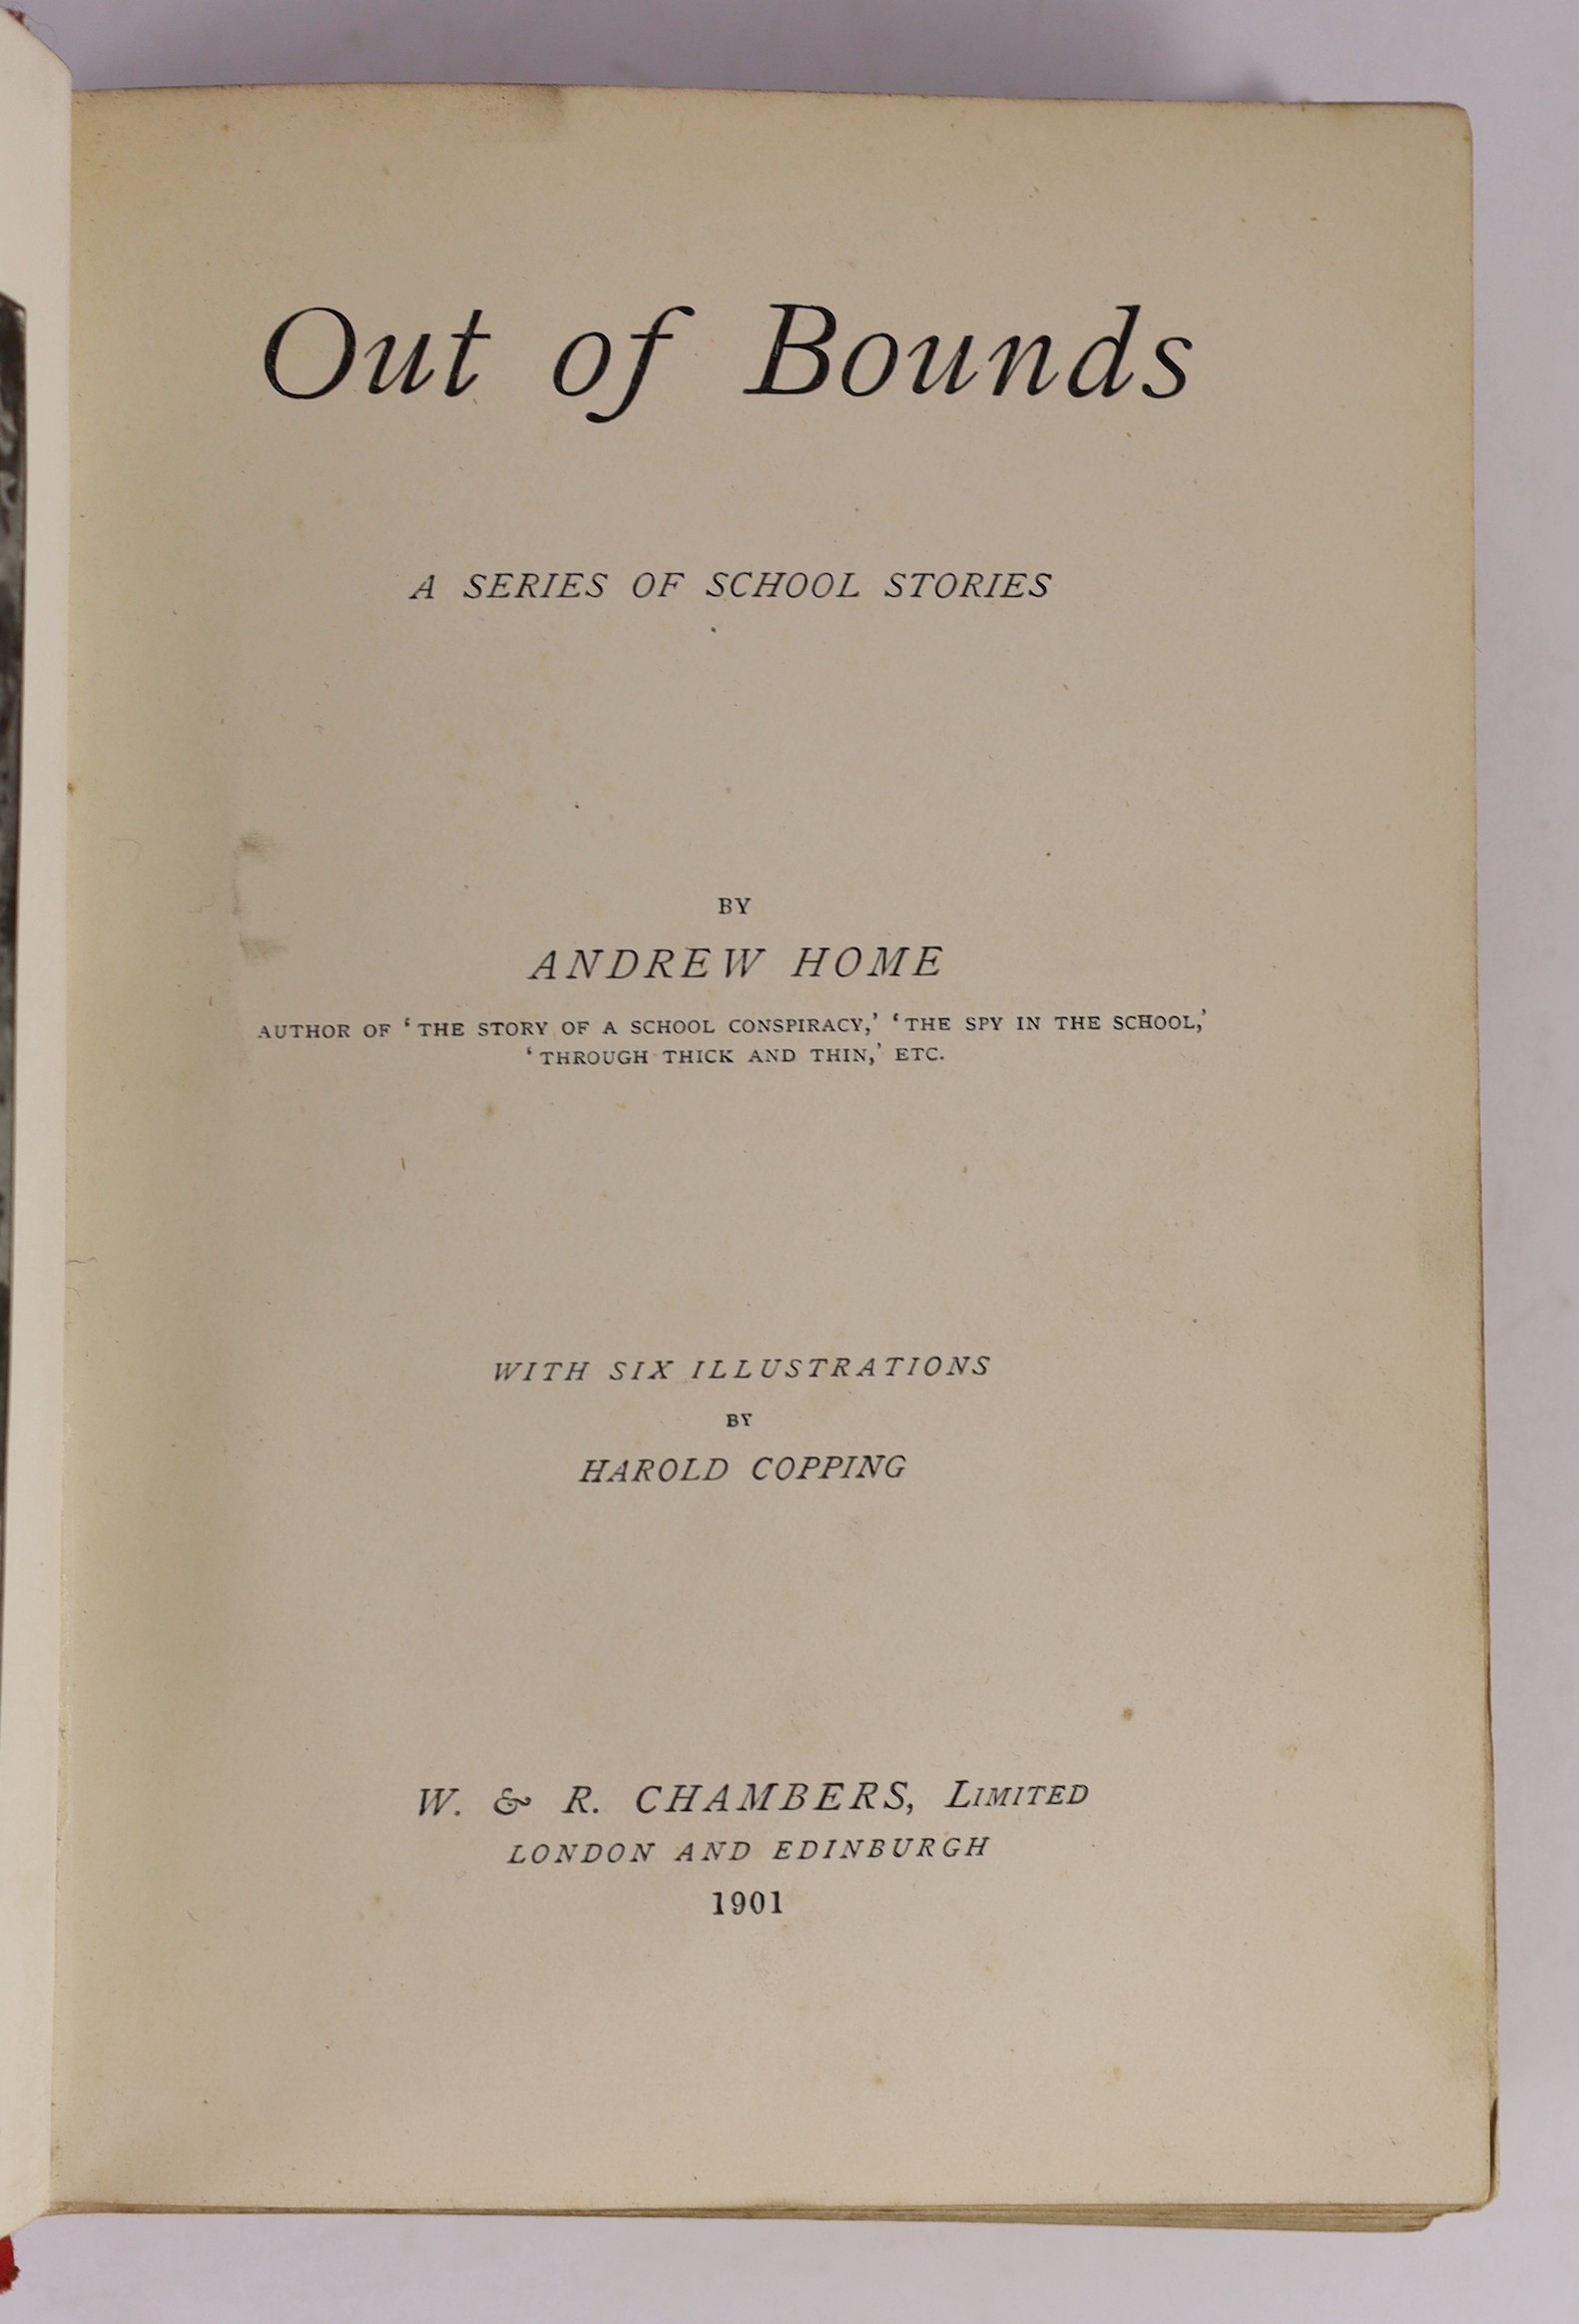 Original Artwork - Harold Copping (1863-1932), original artwork for the front cover and spine of - Out of Bounds, by Andrew Hone, together with the book, 1901